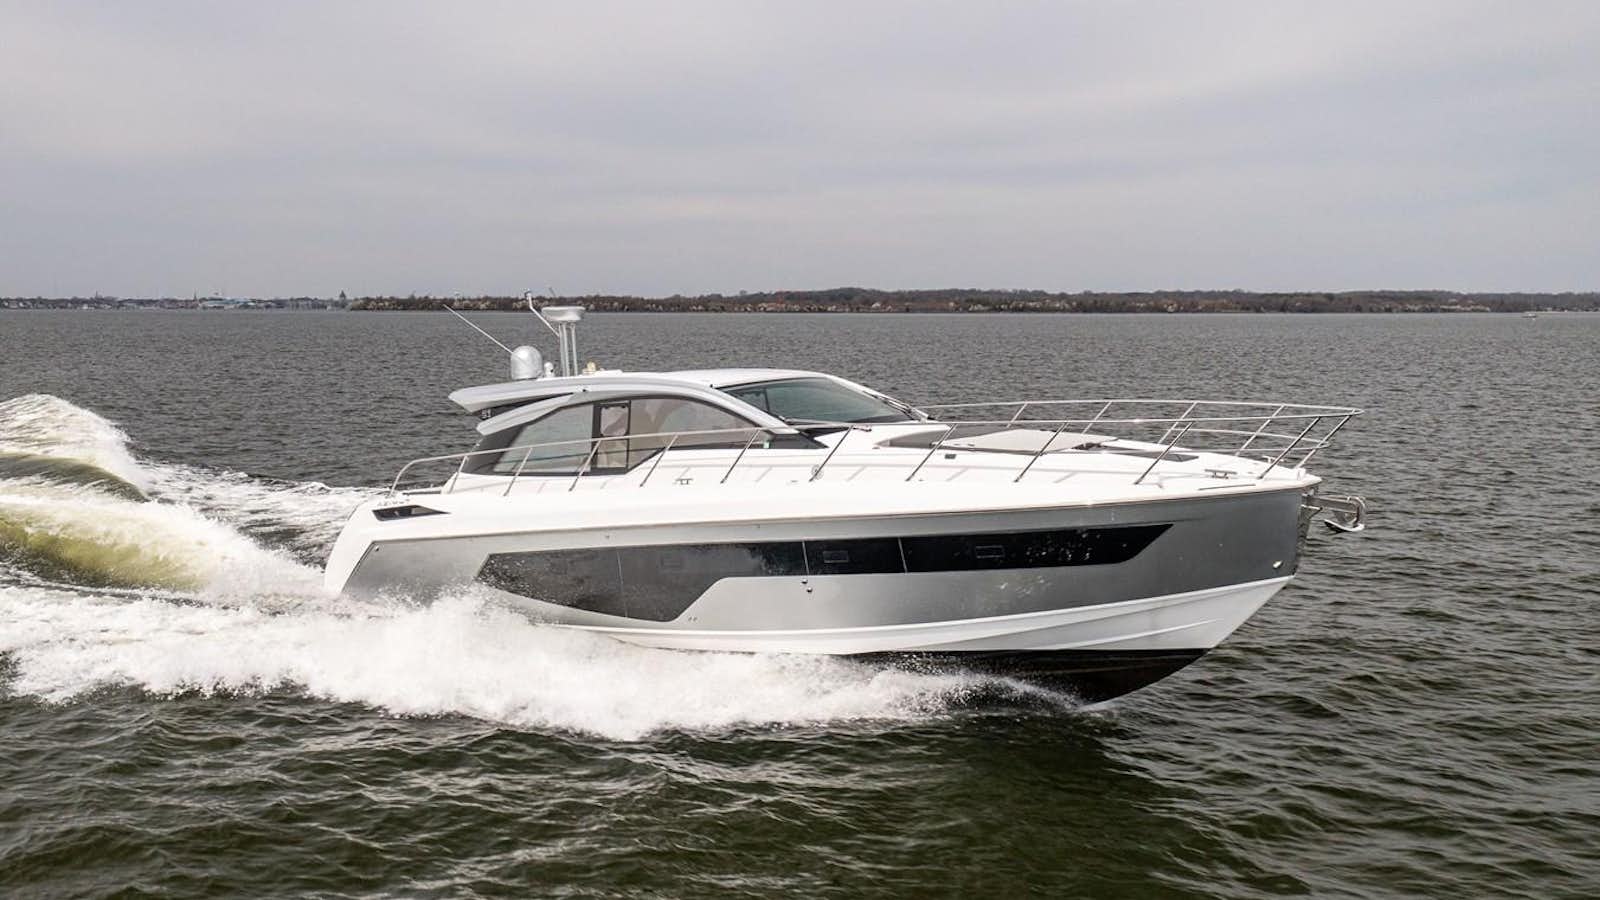 Amici
Yacht for Sale